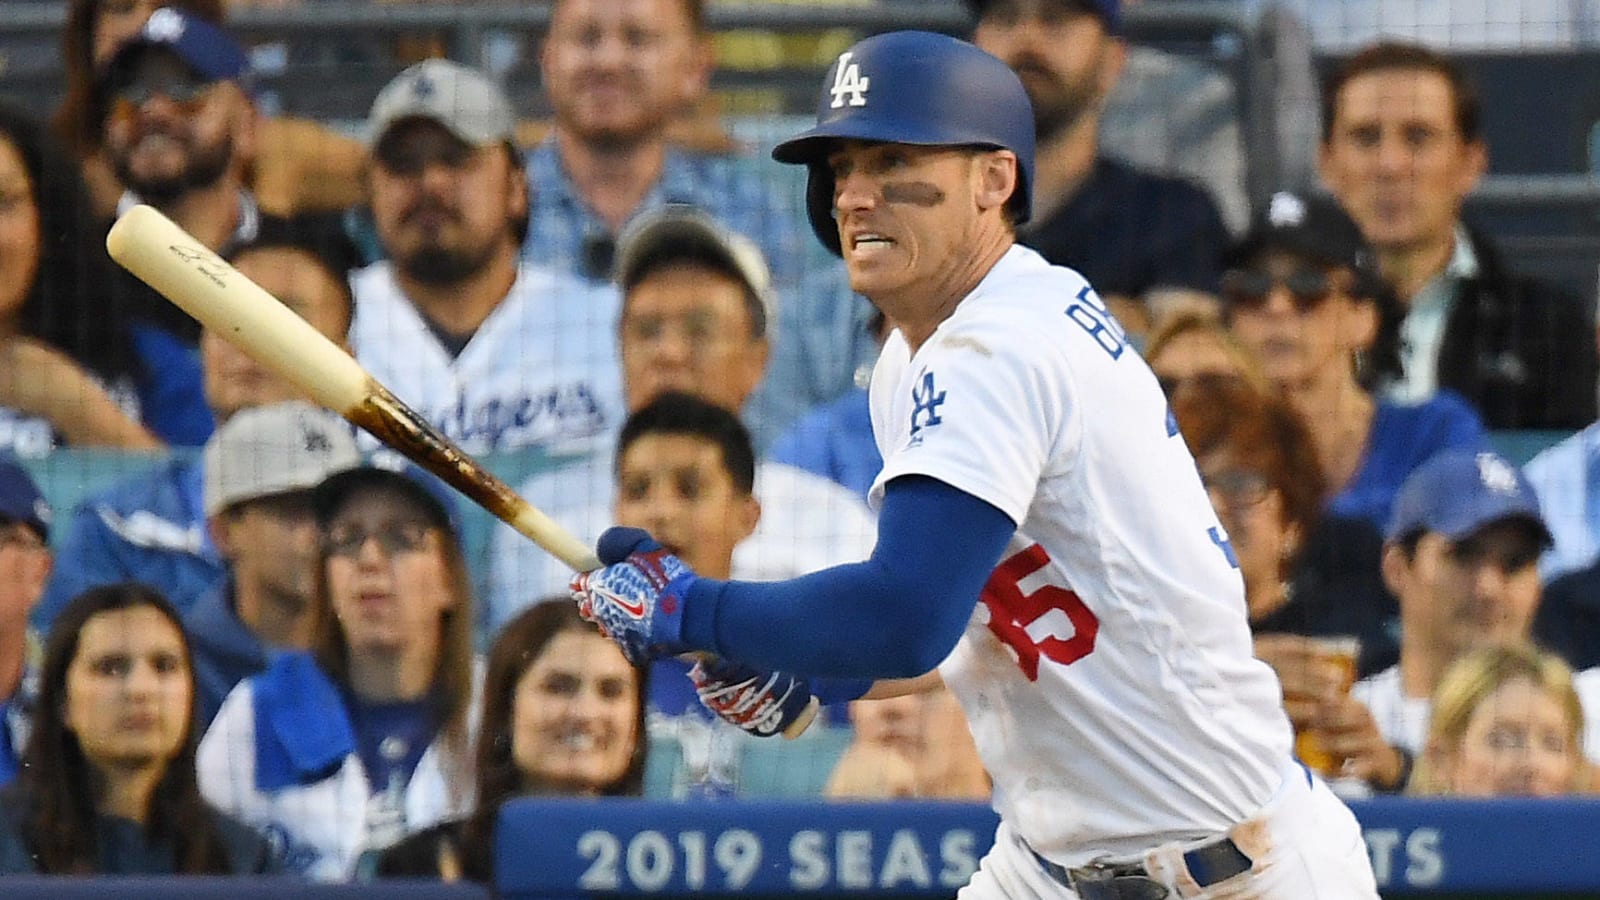 Twitter reacts to Cody Bellinger's epic bat toss